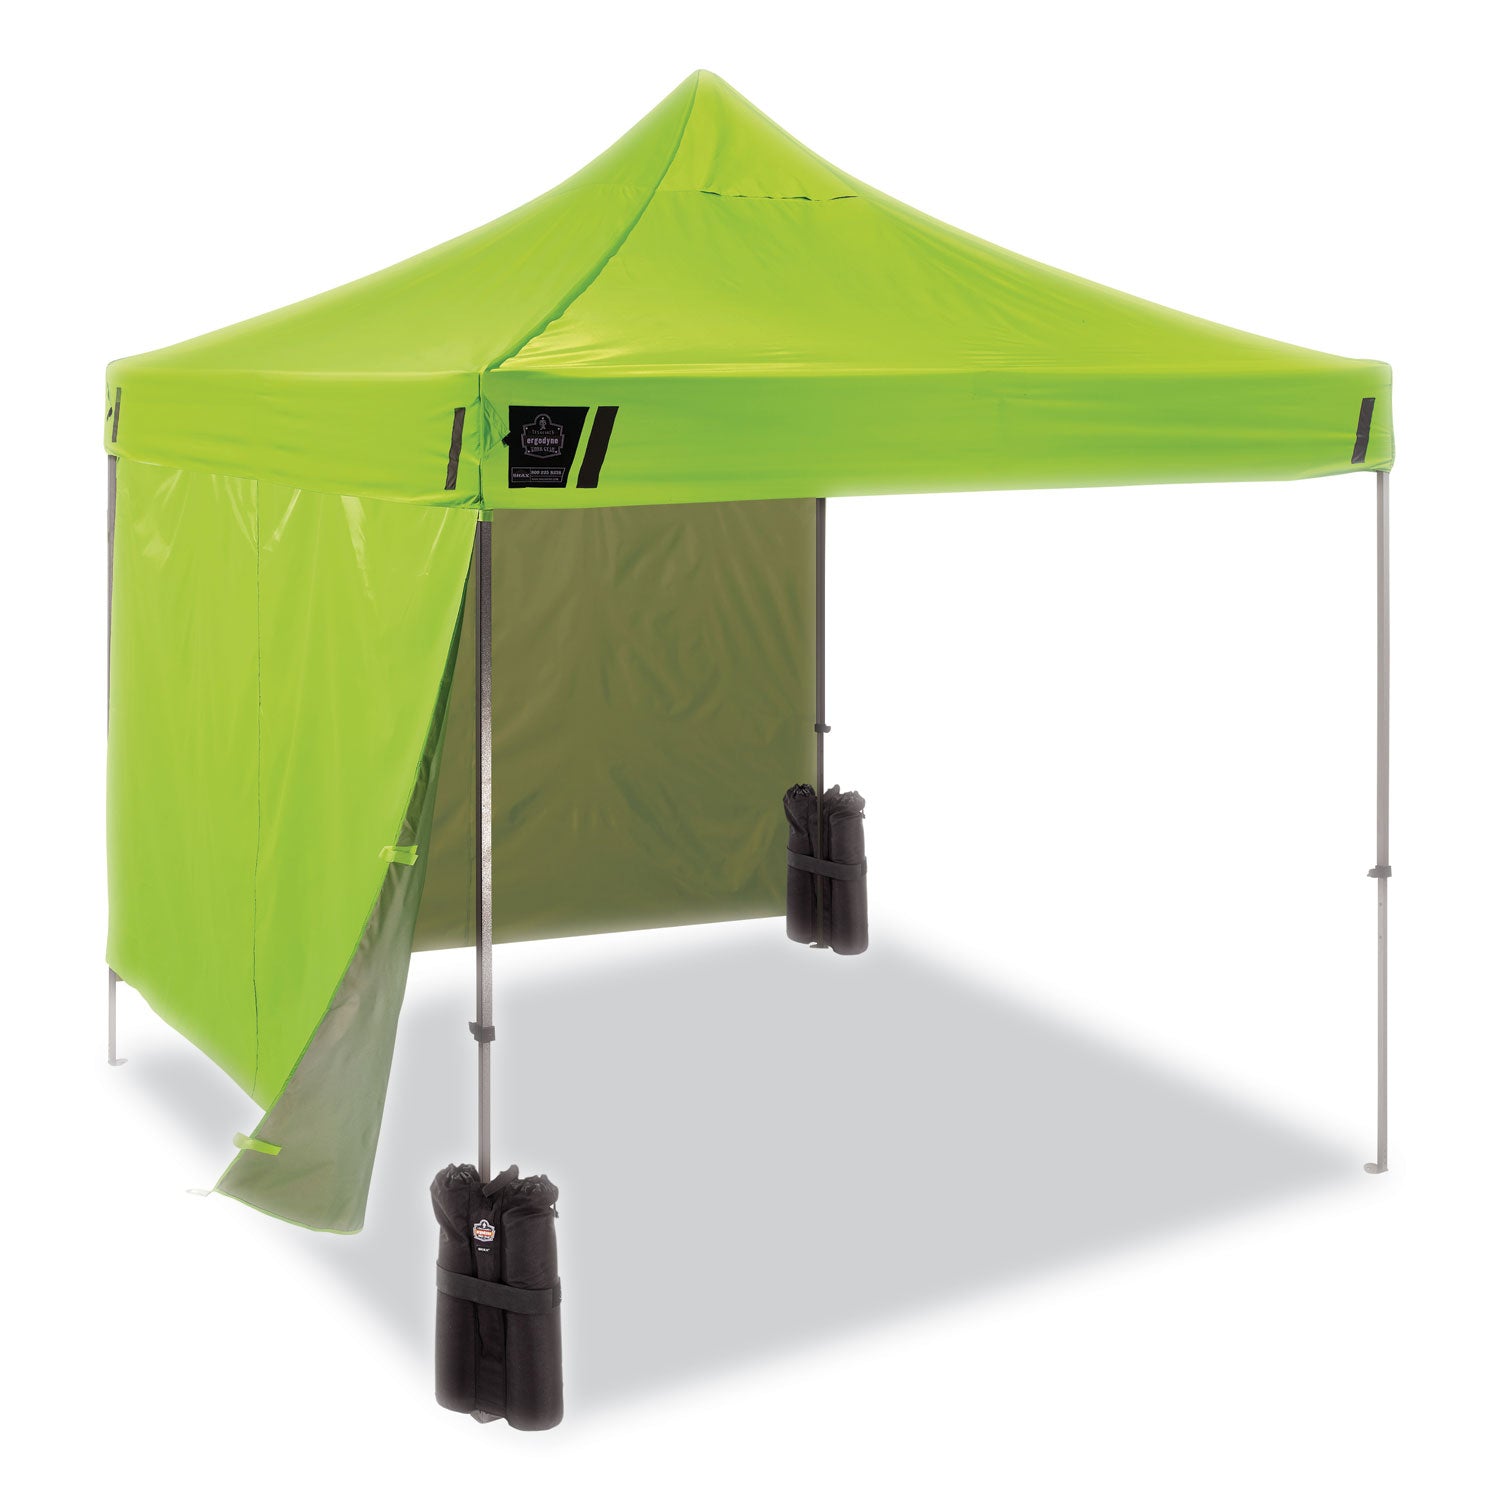 shax-6051-heavy-duty-pop-up-tent-kit-single-skin-10-ft-x-10-ft-polyester-steel-lime-ships-in-1-3-business-days_ego12951 - 1